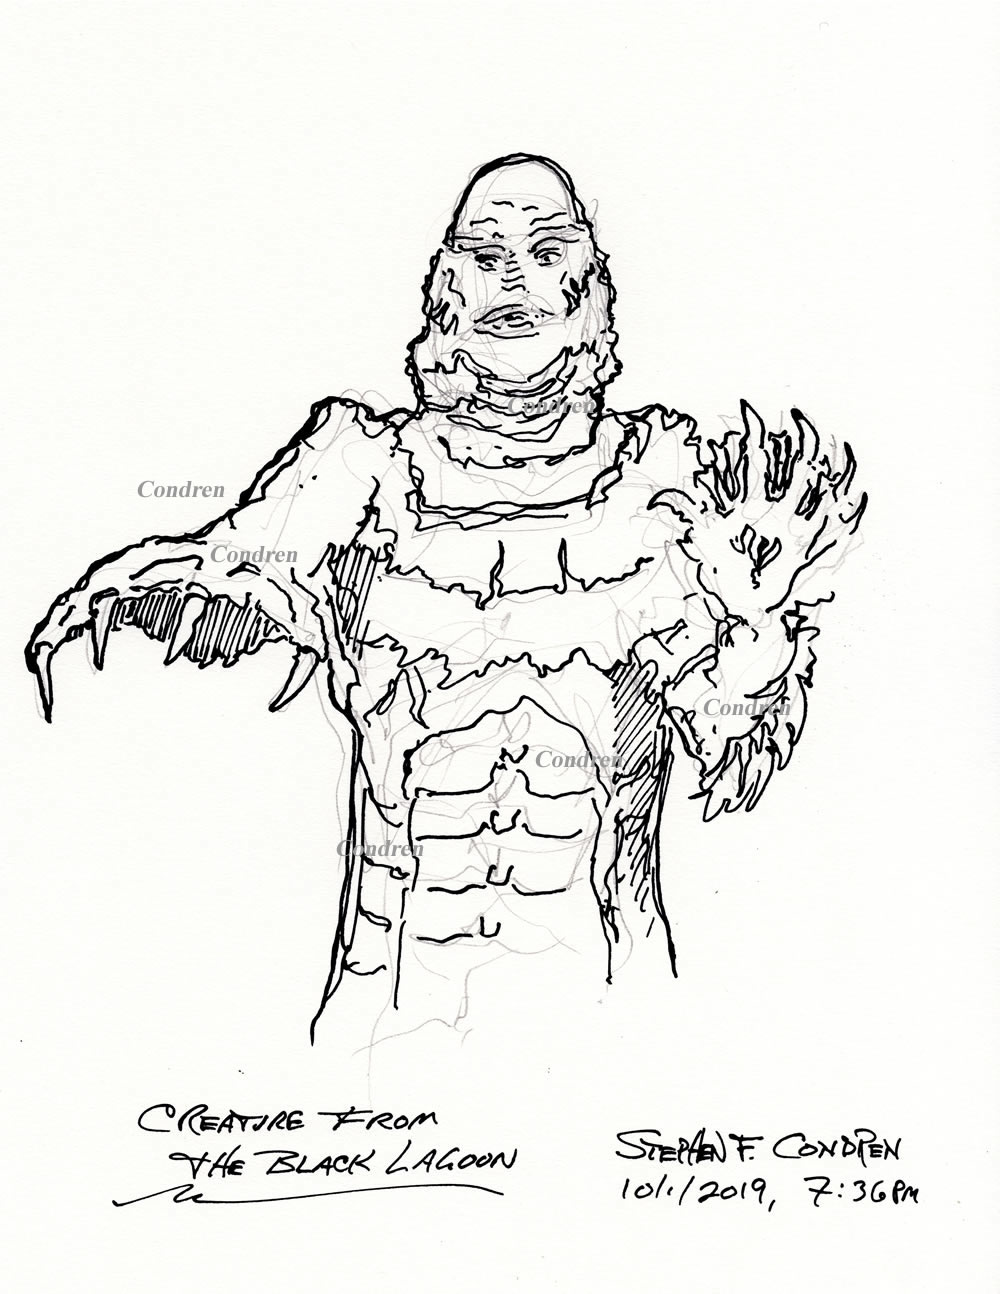 Pen & ink drawing of Creature from the Black Lagoon by artist Stephen F. Condren, with prints and scans.